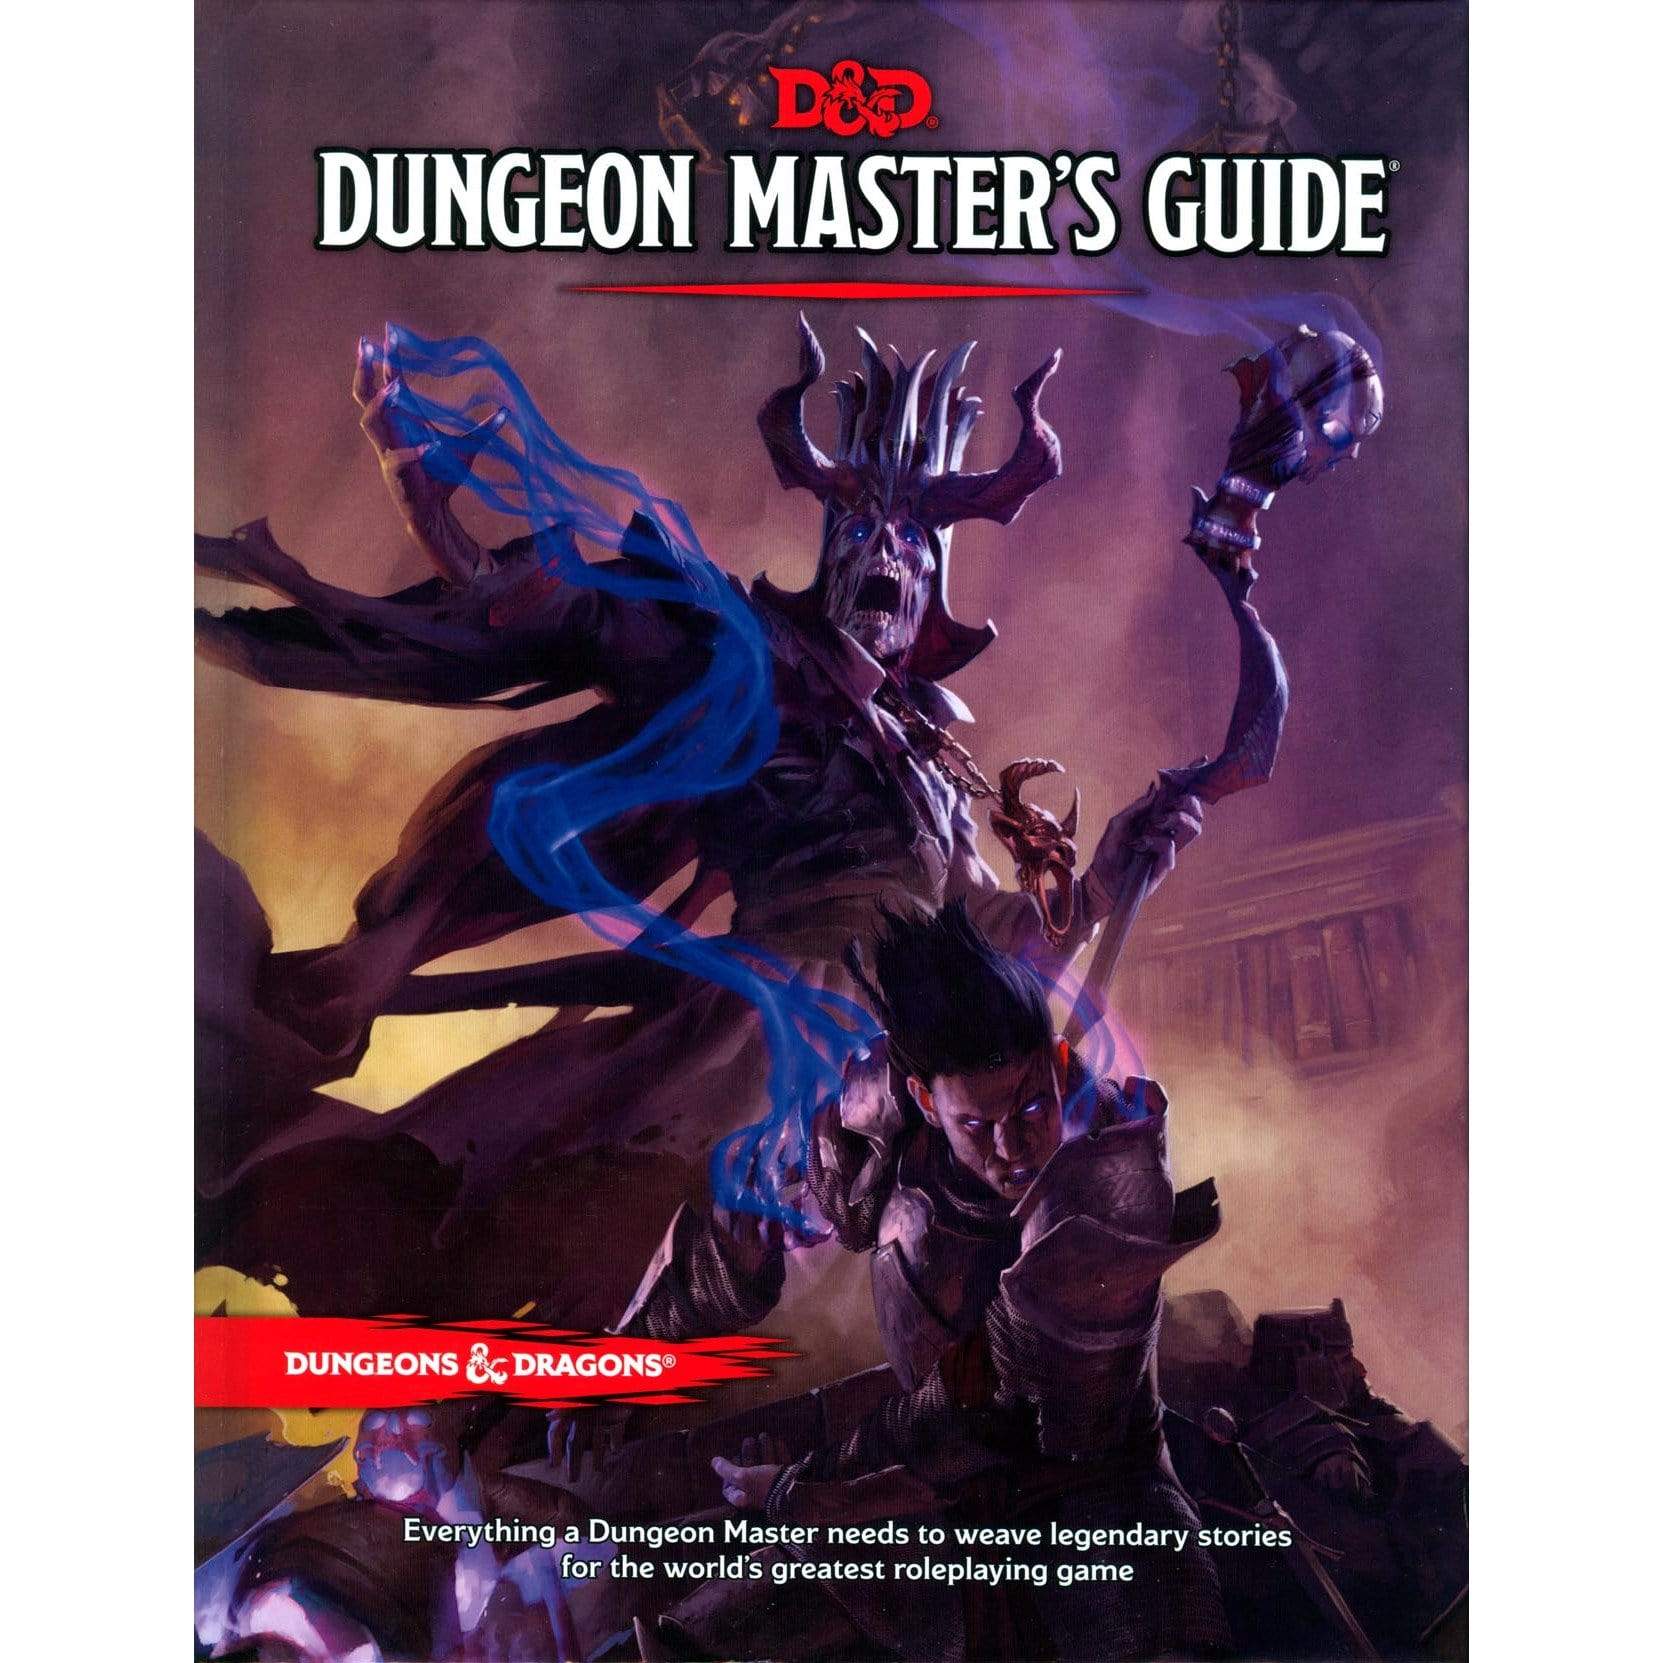 D&D: Dungeon Master's Guide 5th Edition Wizards of the Coast Board Games